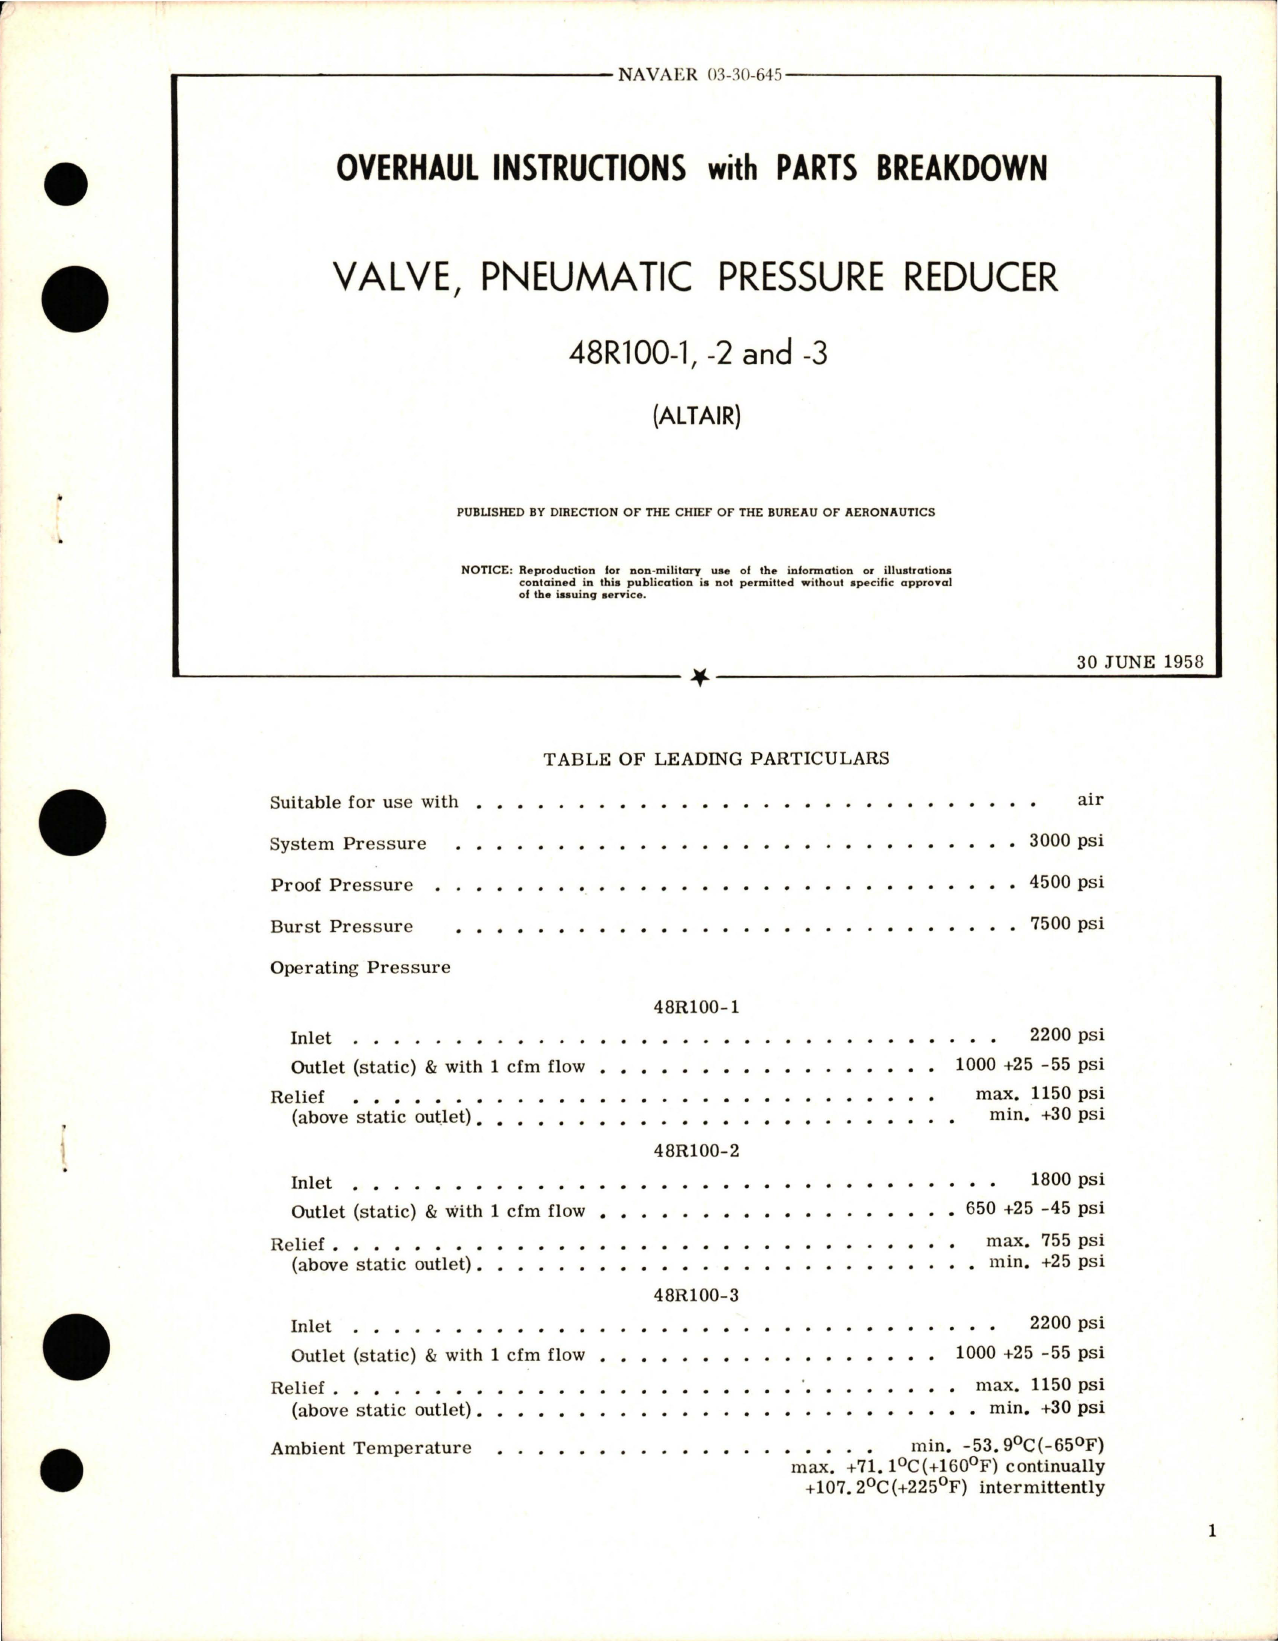 Sample page 1 from AirCorps Library document: Overhaul Instructions with Parts Breakdown for Pneumatic Pressure Reducer Valve - 48R100-1, 48R100-2, and 48R100-3